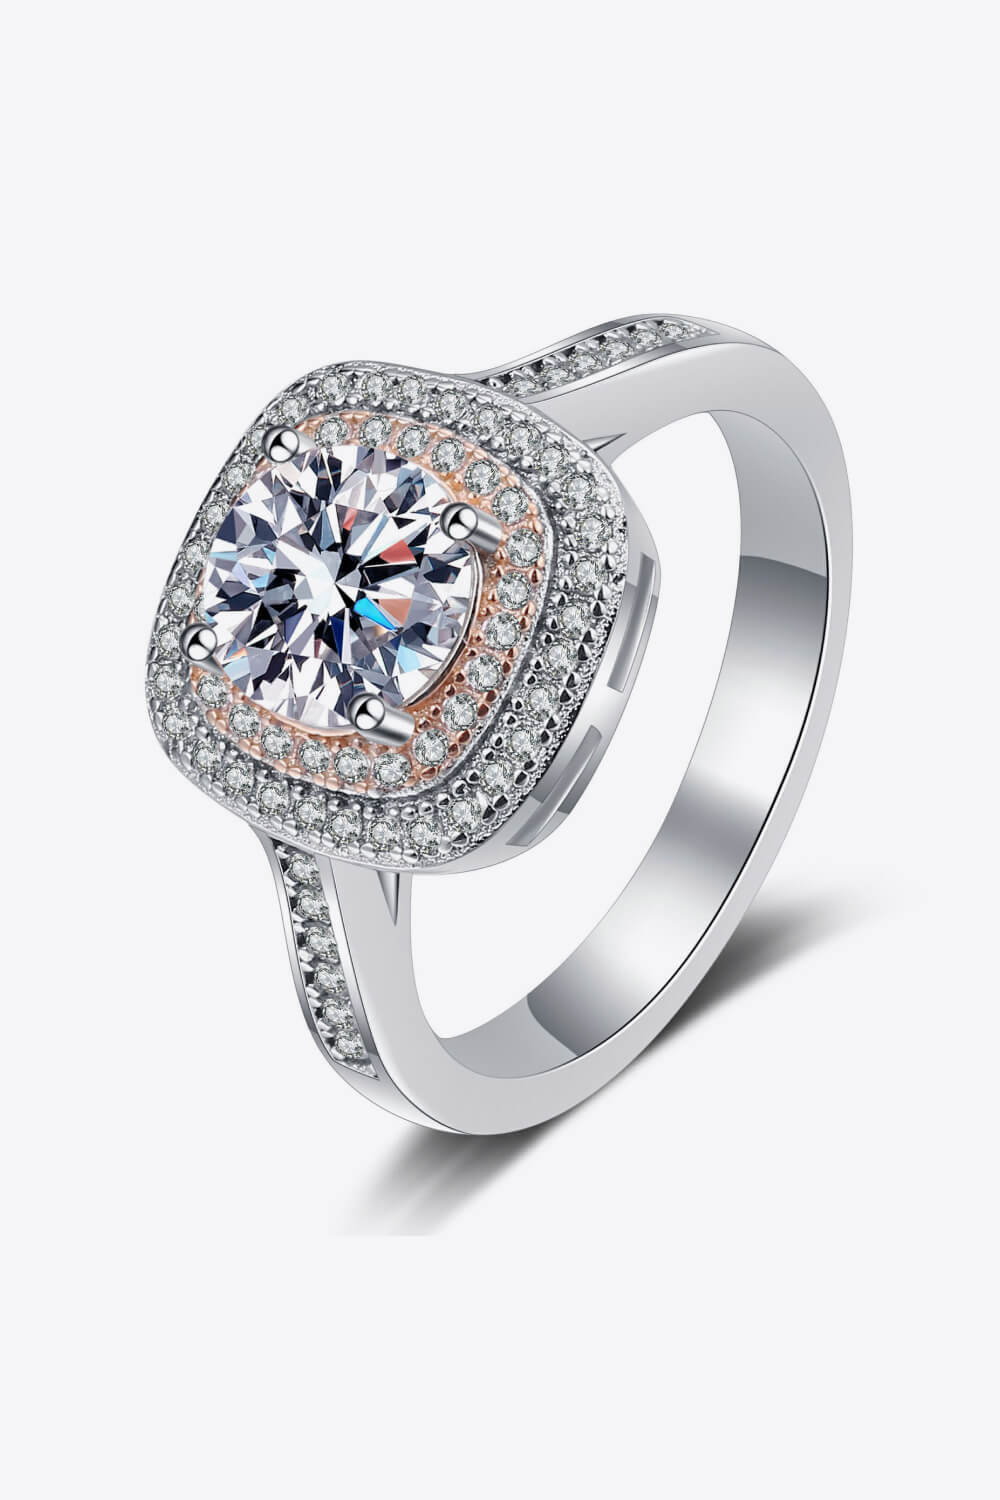 Women’s Need You Now Moissanite Ring